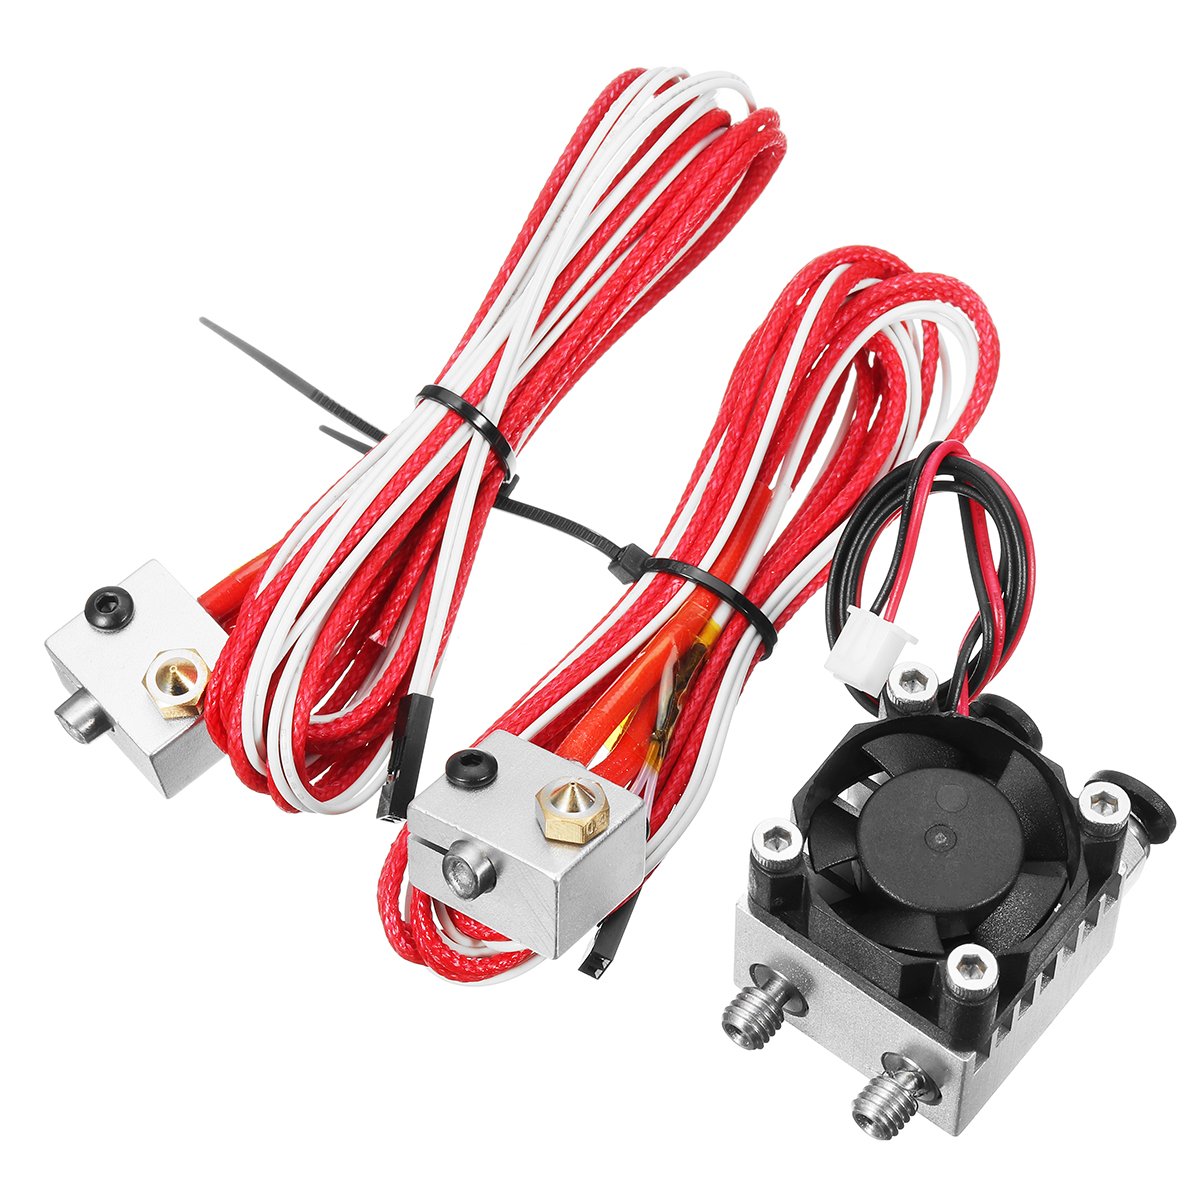 1.75mm/3.0mm Fialment 0.4mm Nozzle Upgraded Dual Head Extruder Kit for 3D Printer 1